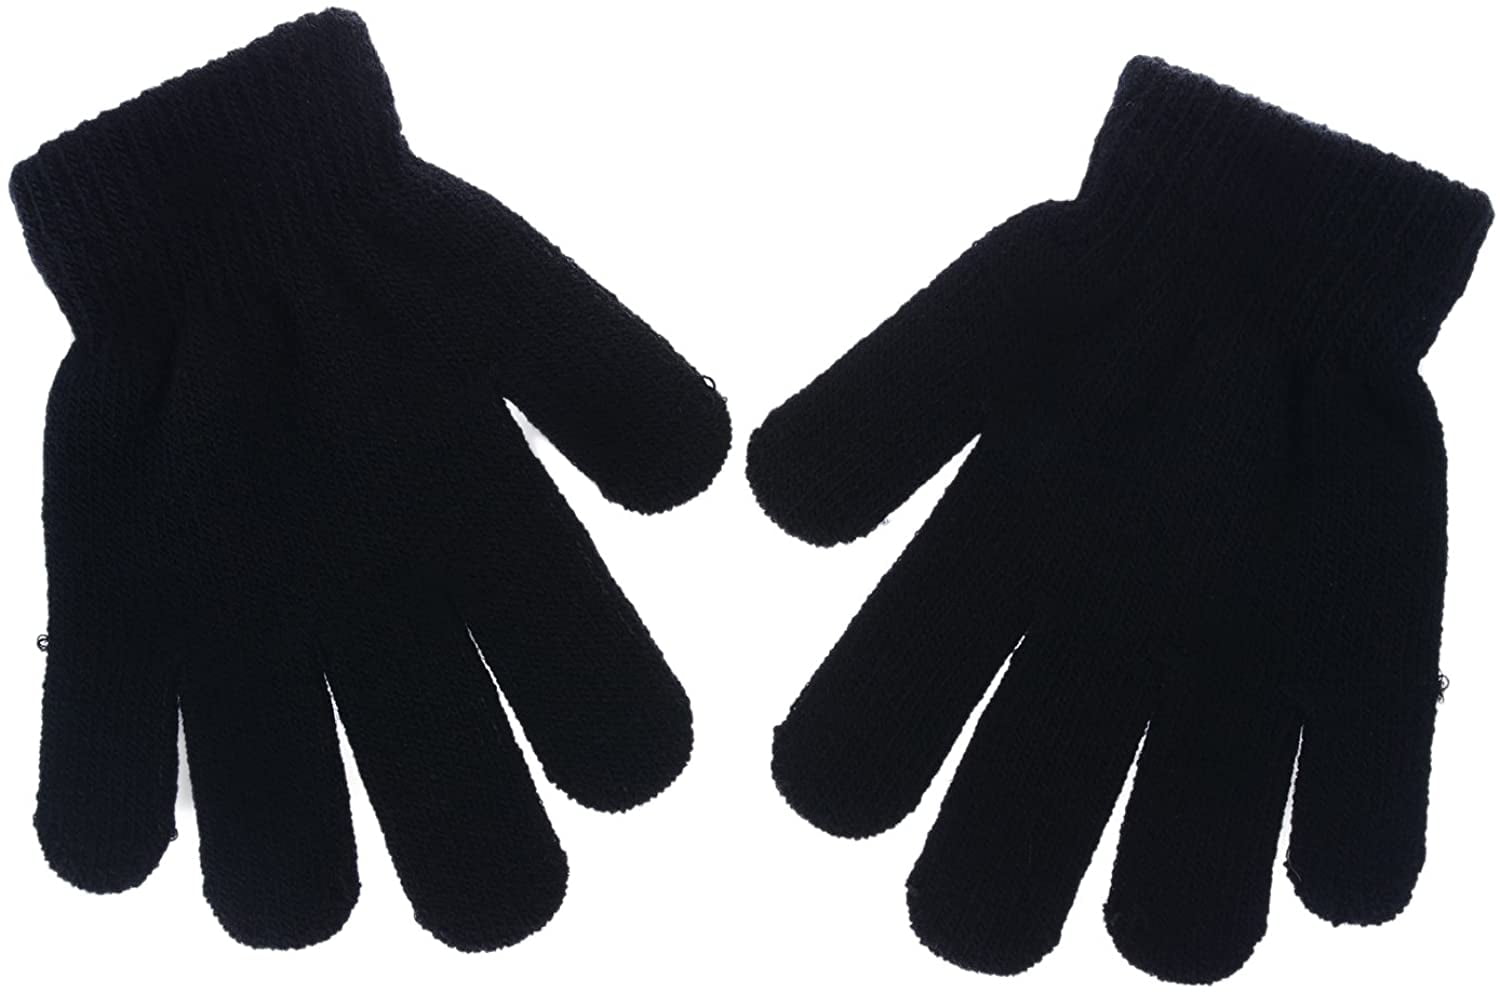 2016 Hot Girls Boys Kids Stretchy Knitted Winter Warm Pick Colour Magic Gloves 